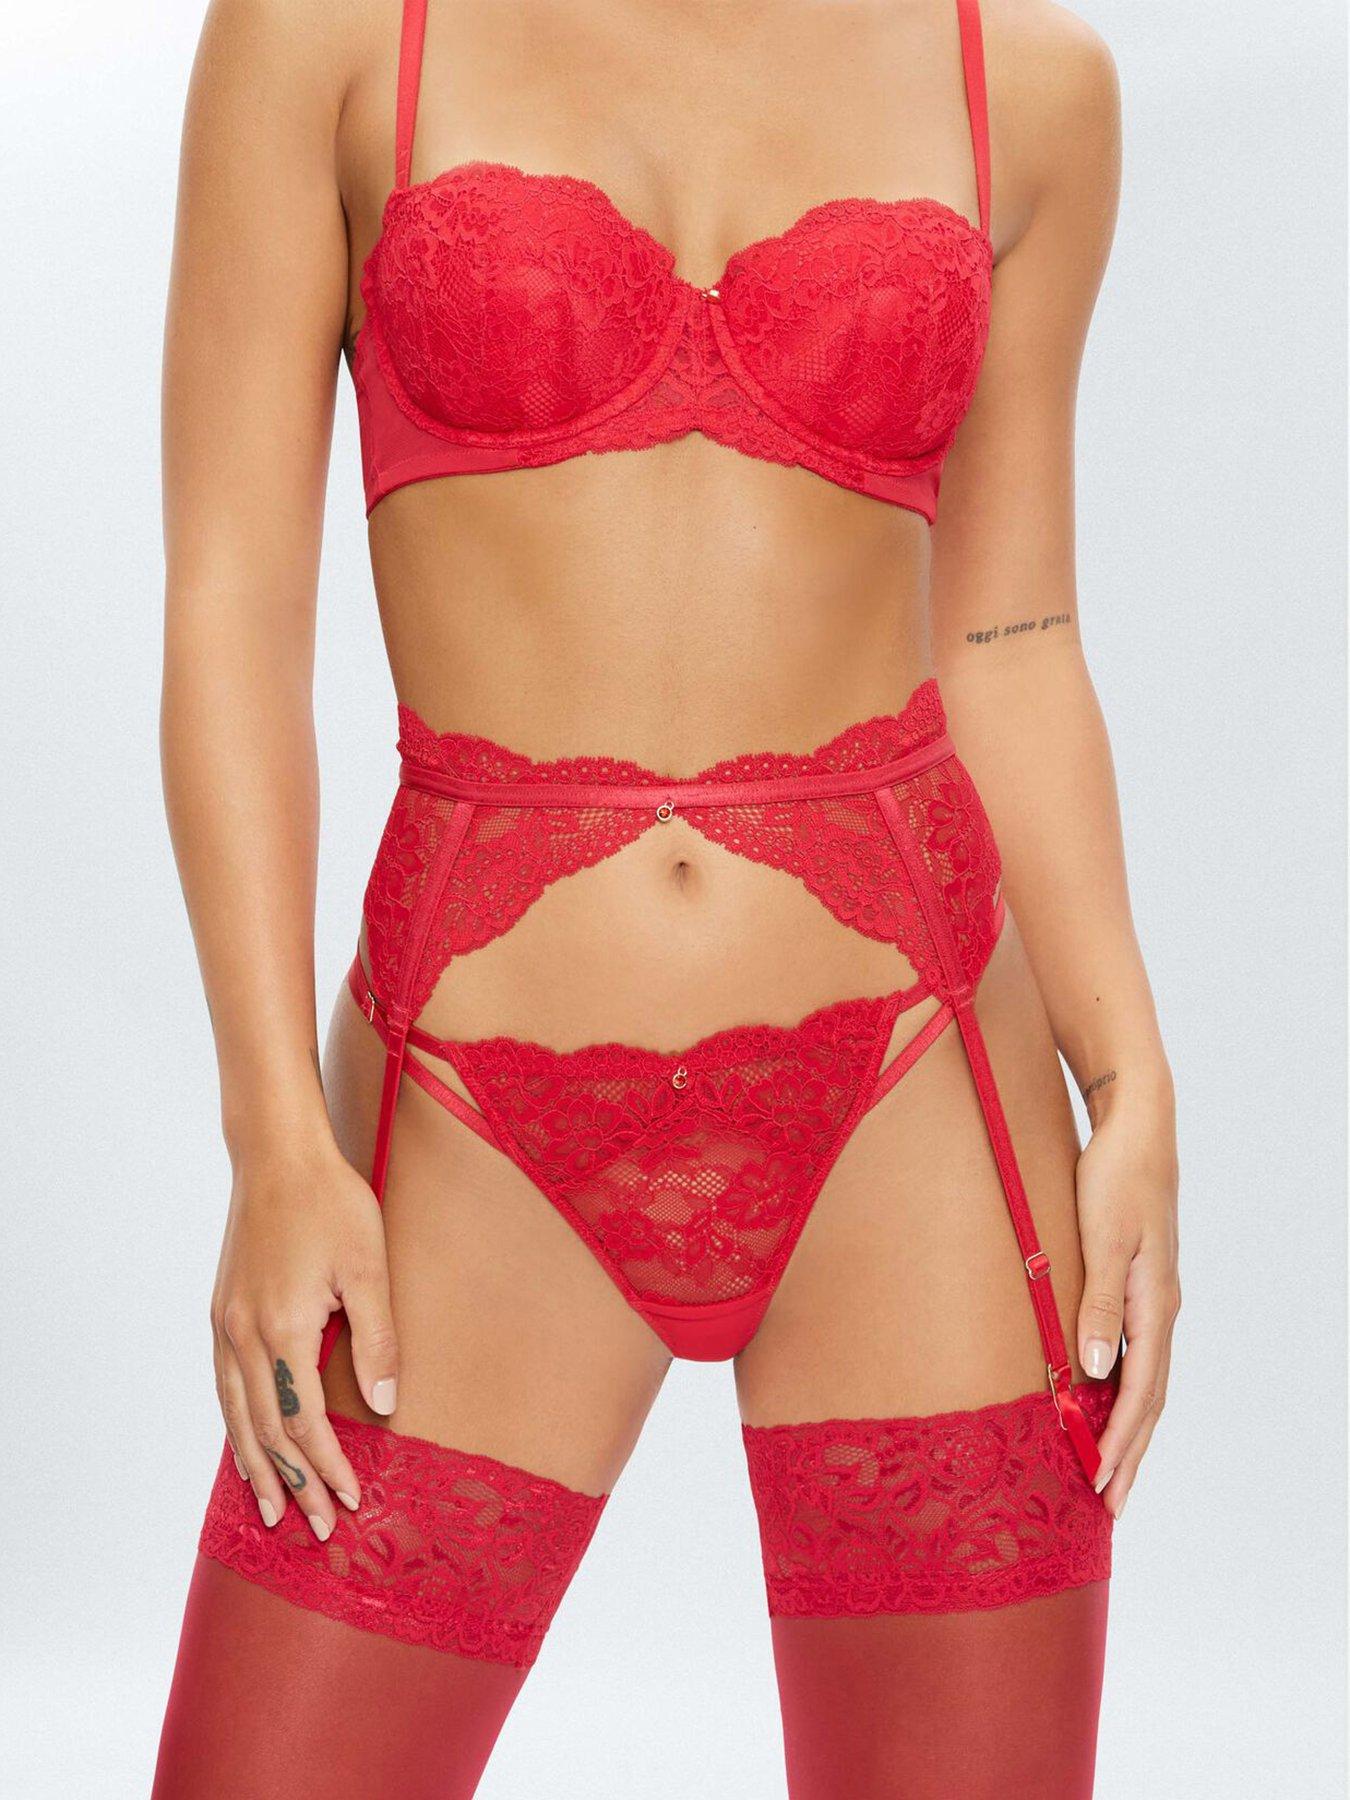 Shop for Ann Summers, Red, Lingerie